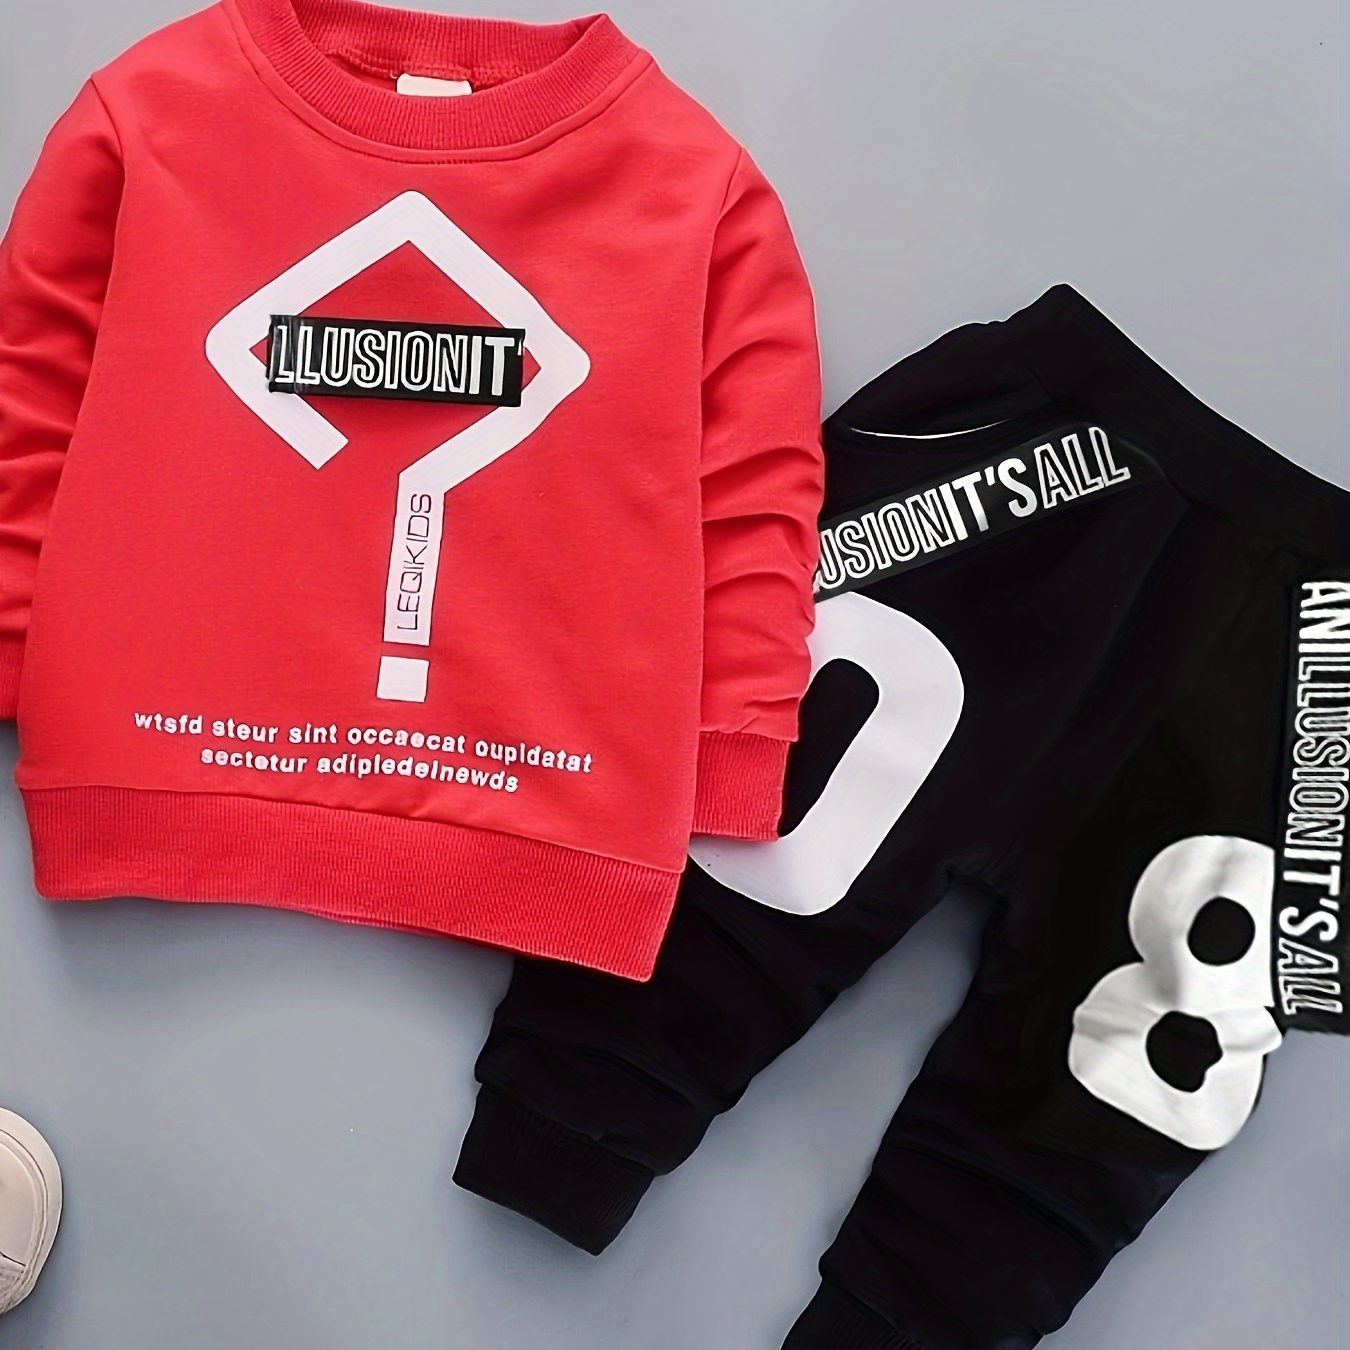 

Boys Question Mark Print Long Sleeve Casual Round Neck Sweatshirt & Pants Set, Kids Trendy Street Casual Style Outfit